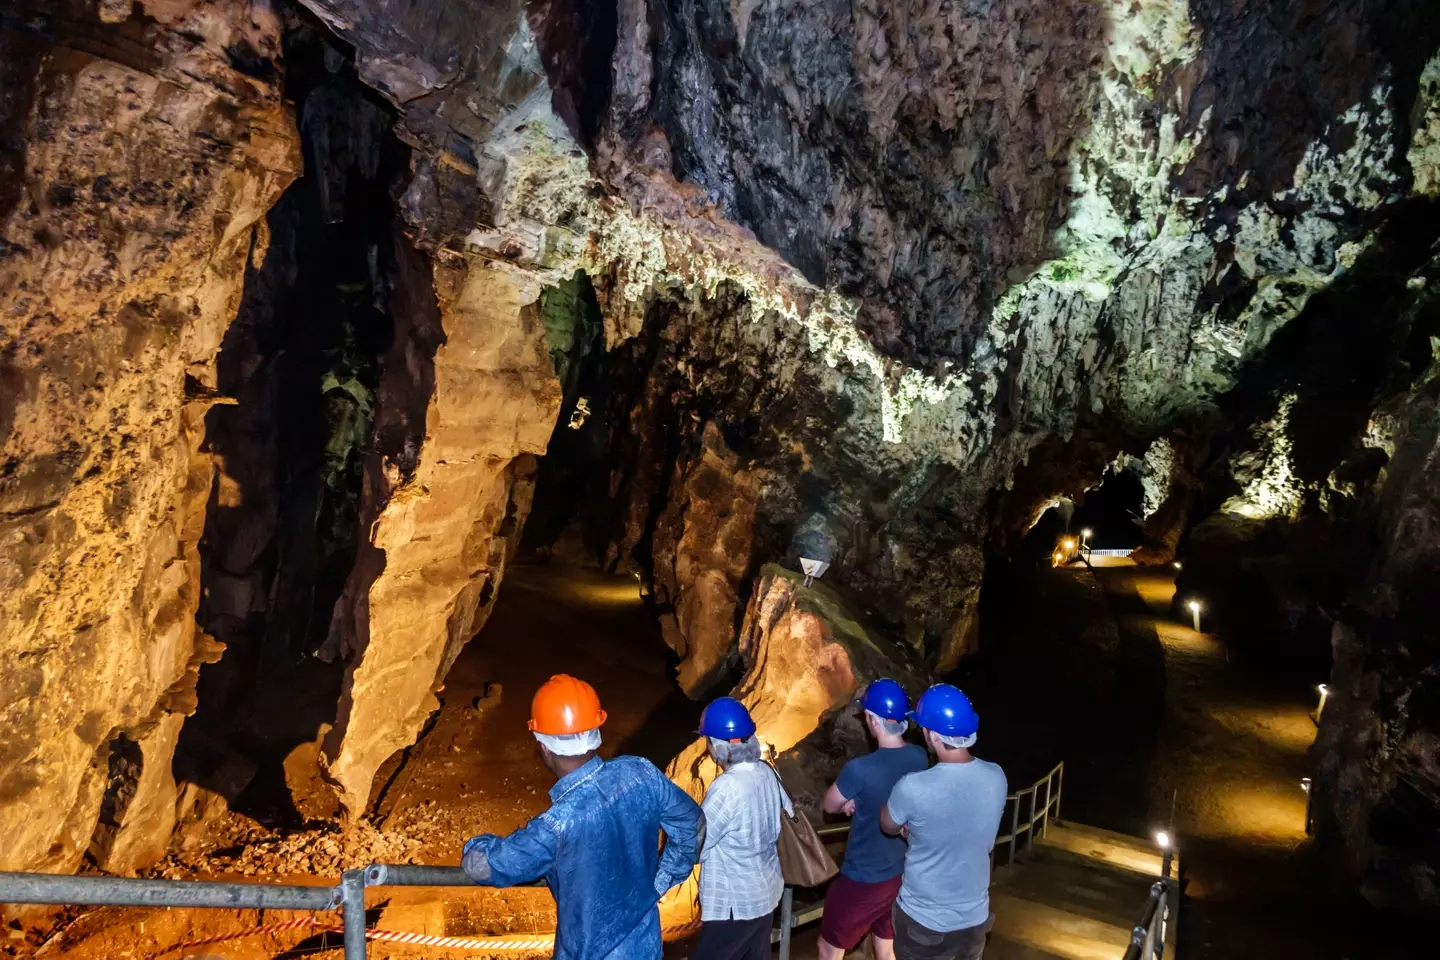 These days the Sterkfontein Caves are a tourist attraction. (Jeffrey Greenberg/Universal Images Group via Getty Images)